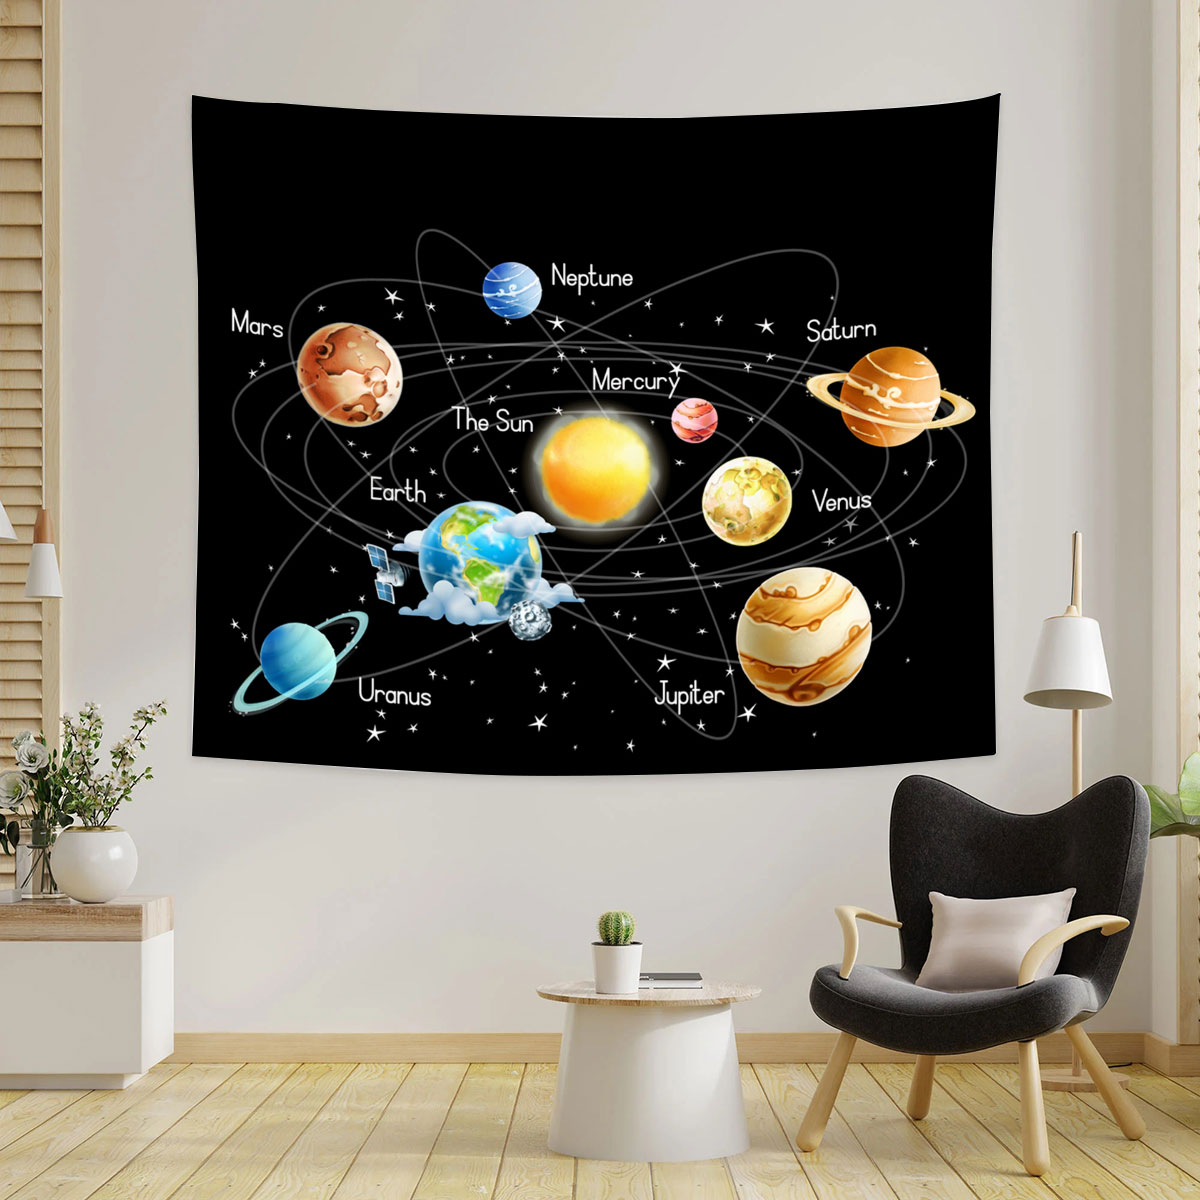 Our Planet Tapestry